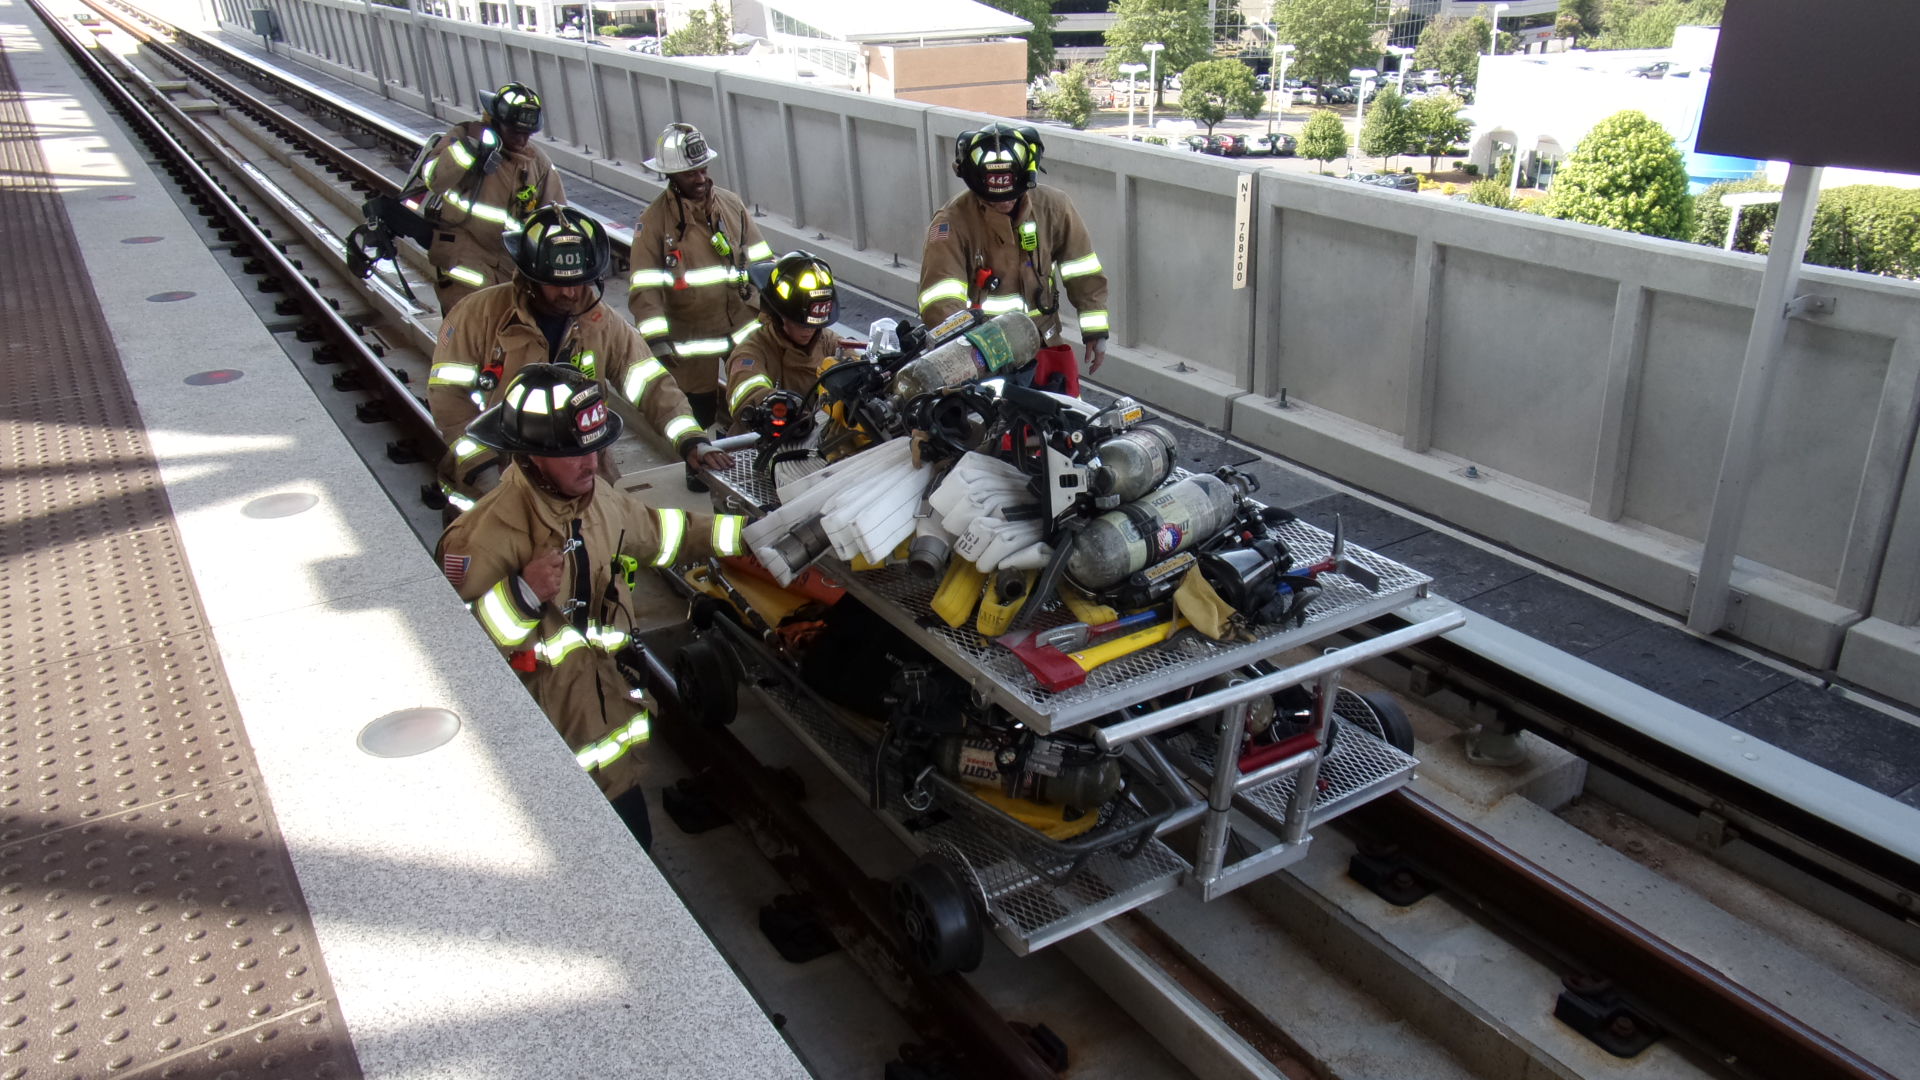 Safety drill conducted ahead of Silver Line opening